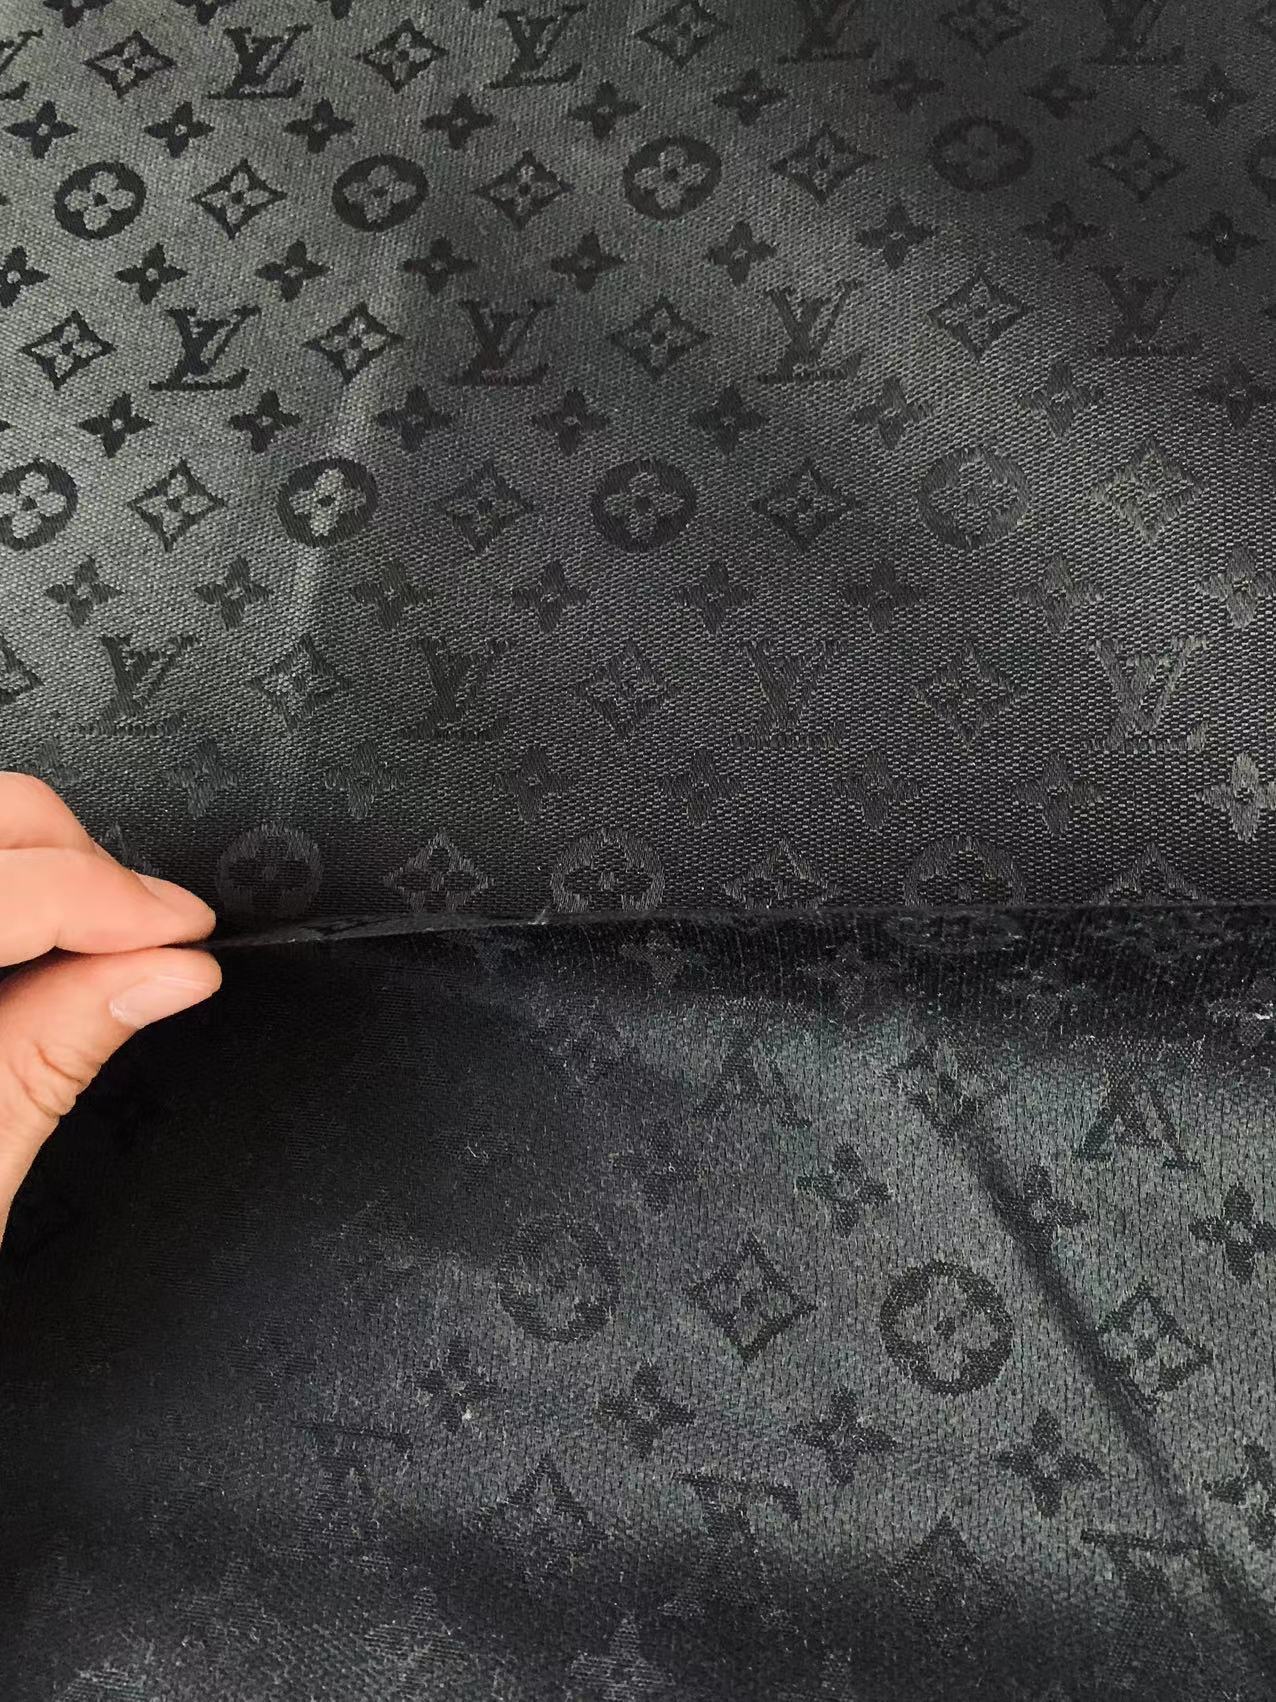 Fashion Black LV Jacquard Cloth Fabric For Handmade Sneaker,Upholstery And Apparel